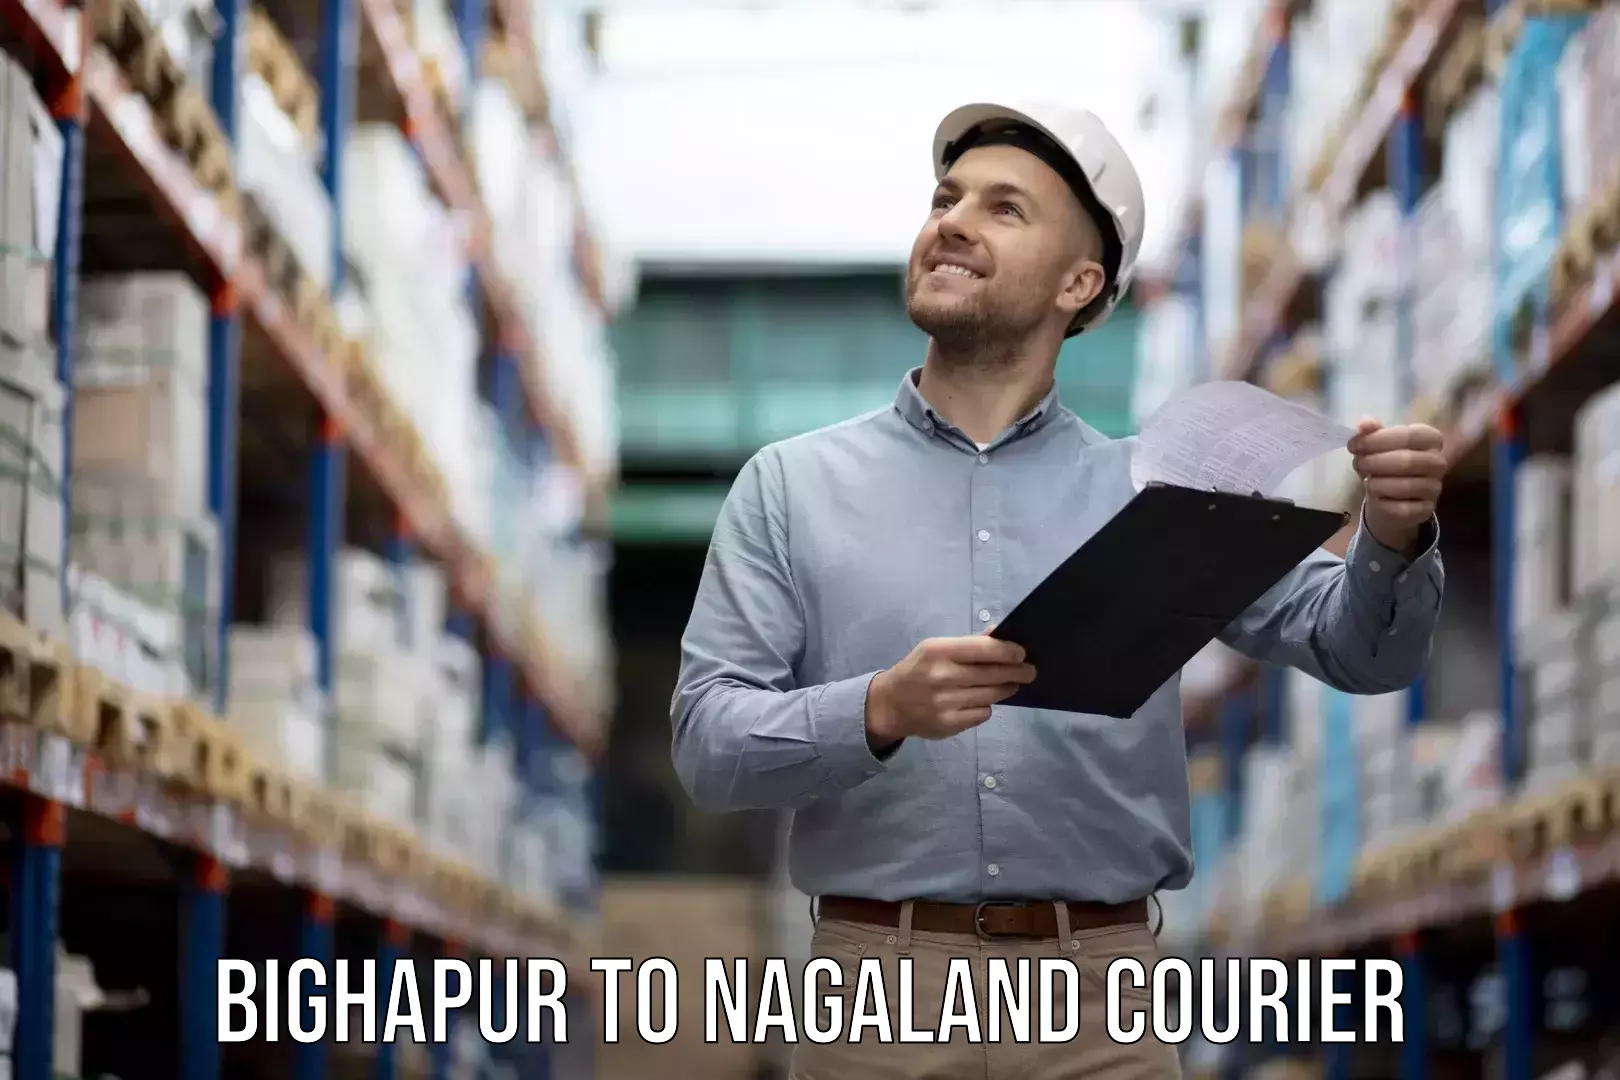 Furniture relocation experts Bighapur to Nagaland